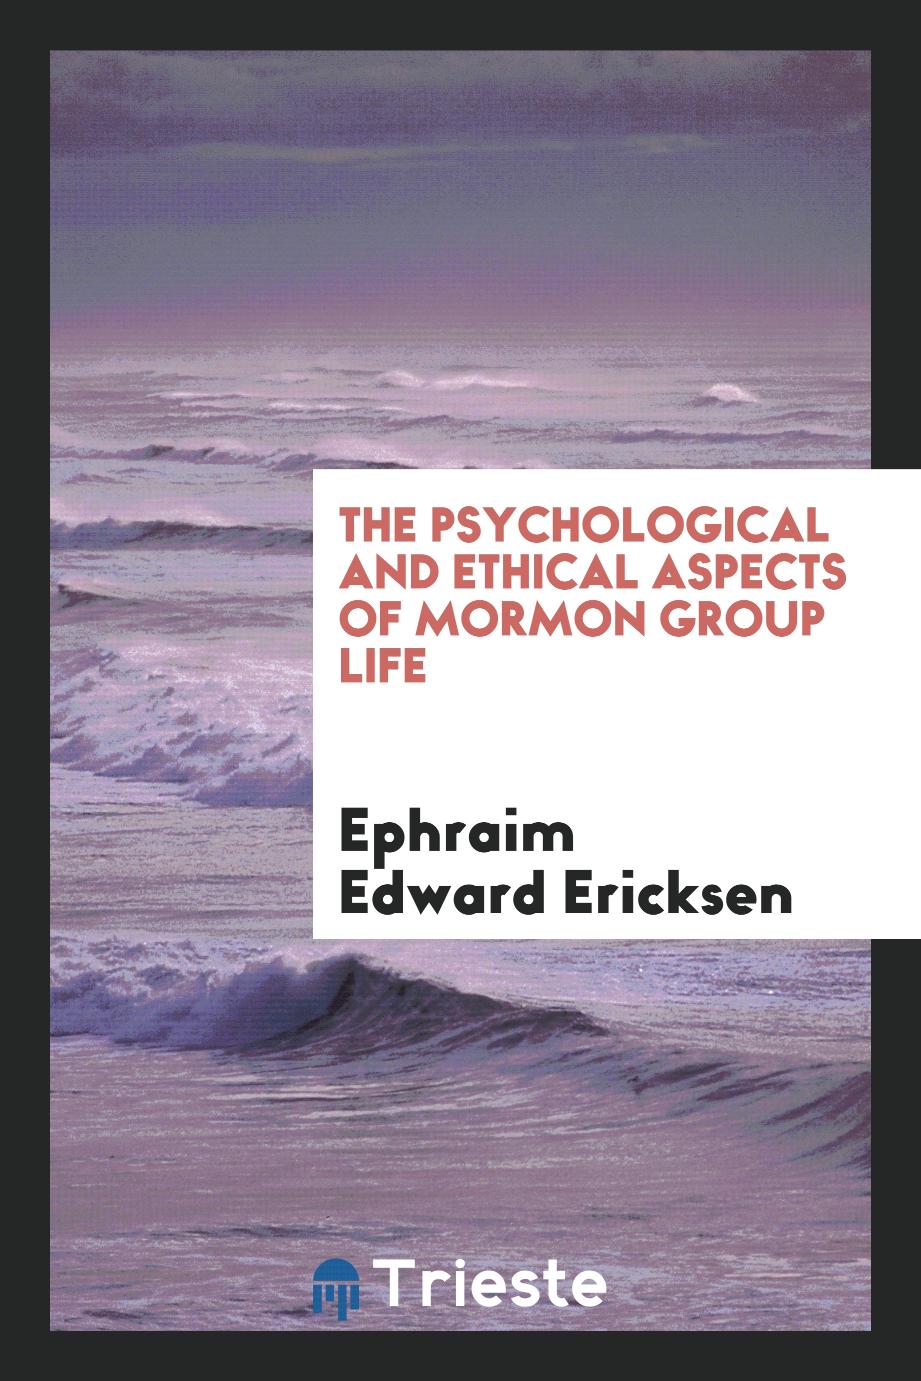 The psychological and ethical aspects of Mormon group life